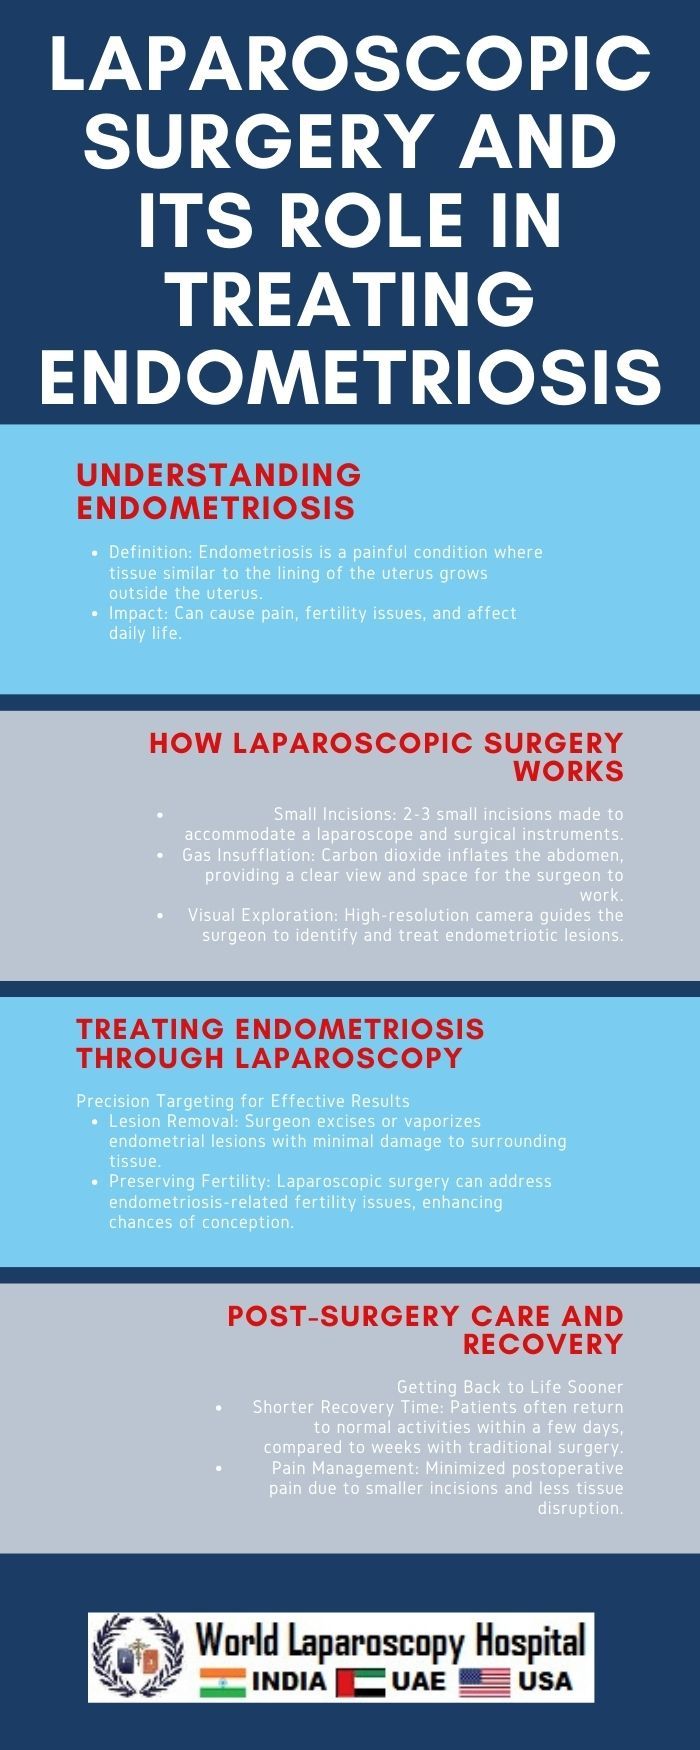 Laparoscopic Surgery and its Role in Treating Endometriosis